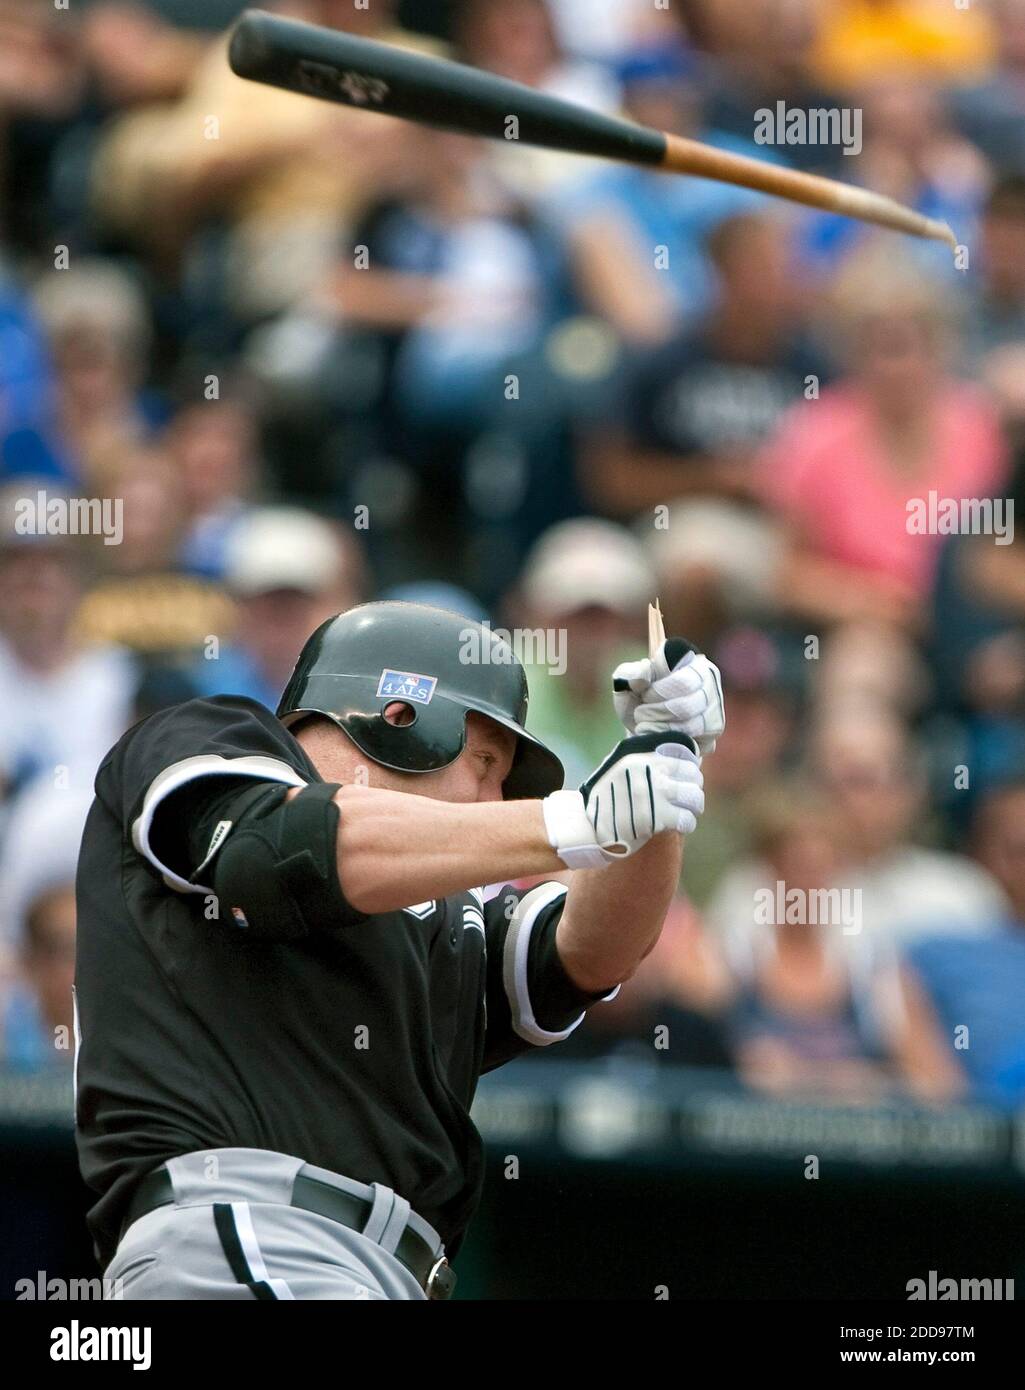 NO FILM, NO VIDEO, NO TV, NO DOCUMENTARY - The Chicago White Sox's Jim Thome breaks his bat on a pop up during the ninth inning against the Kansas City Royals. The Royals defeated the White Sox, 6-4, at Kauffman Stadium in Kansas City, MI, USA on July 4, 2009. Photo by John Sleezer/Kansas City Star/MCT/Cameleon/ABACAPRESS.COM Stock Photo